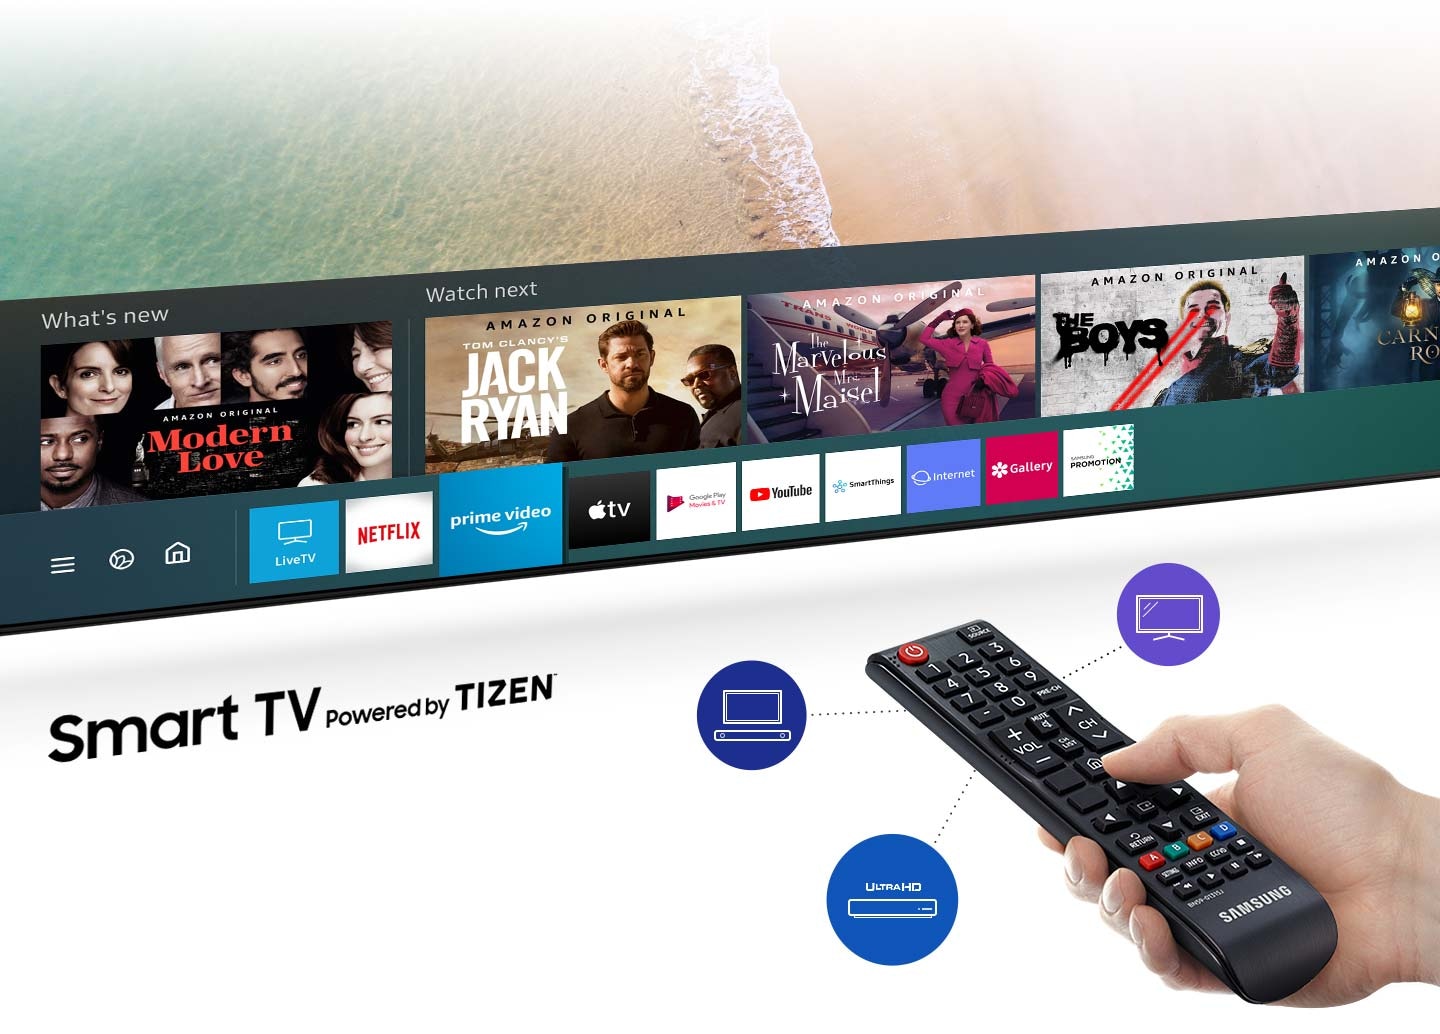 Find a variety of content with a single remote control device